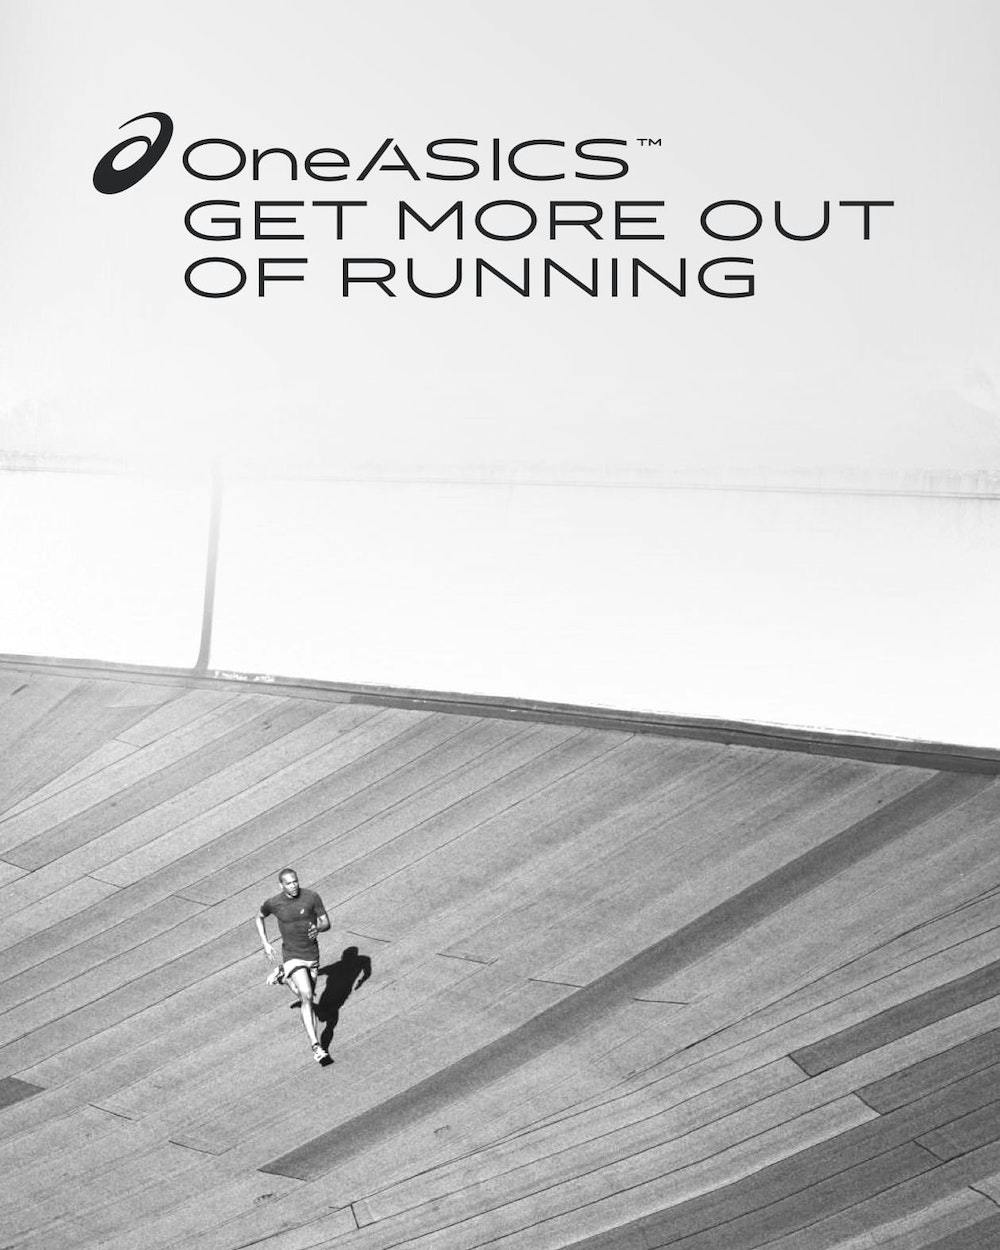 OneASICS - Get more out of running